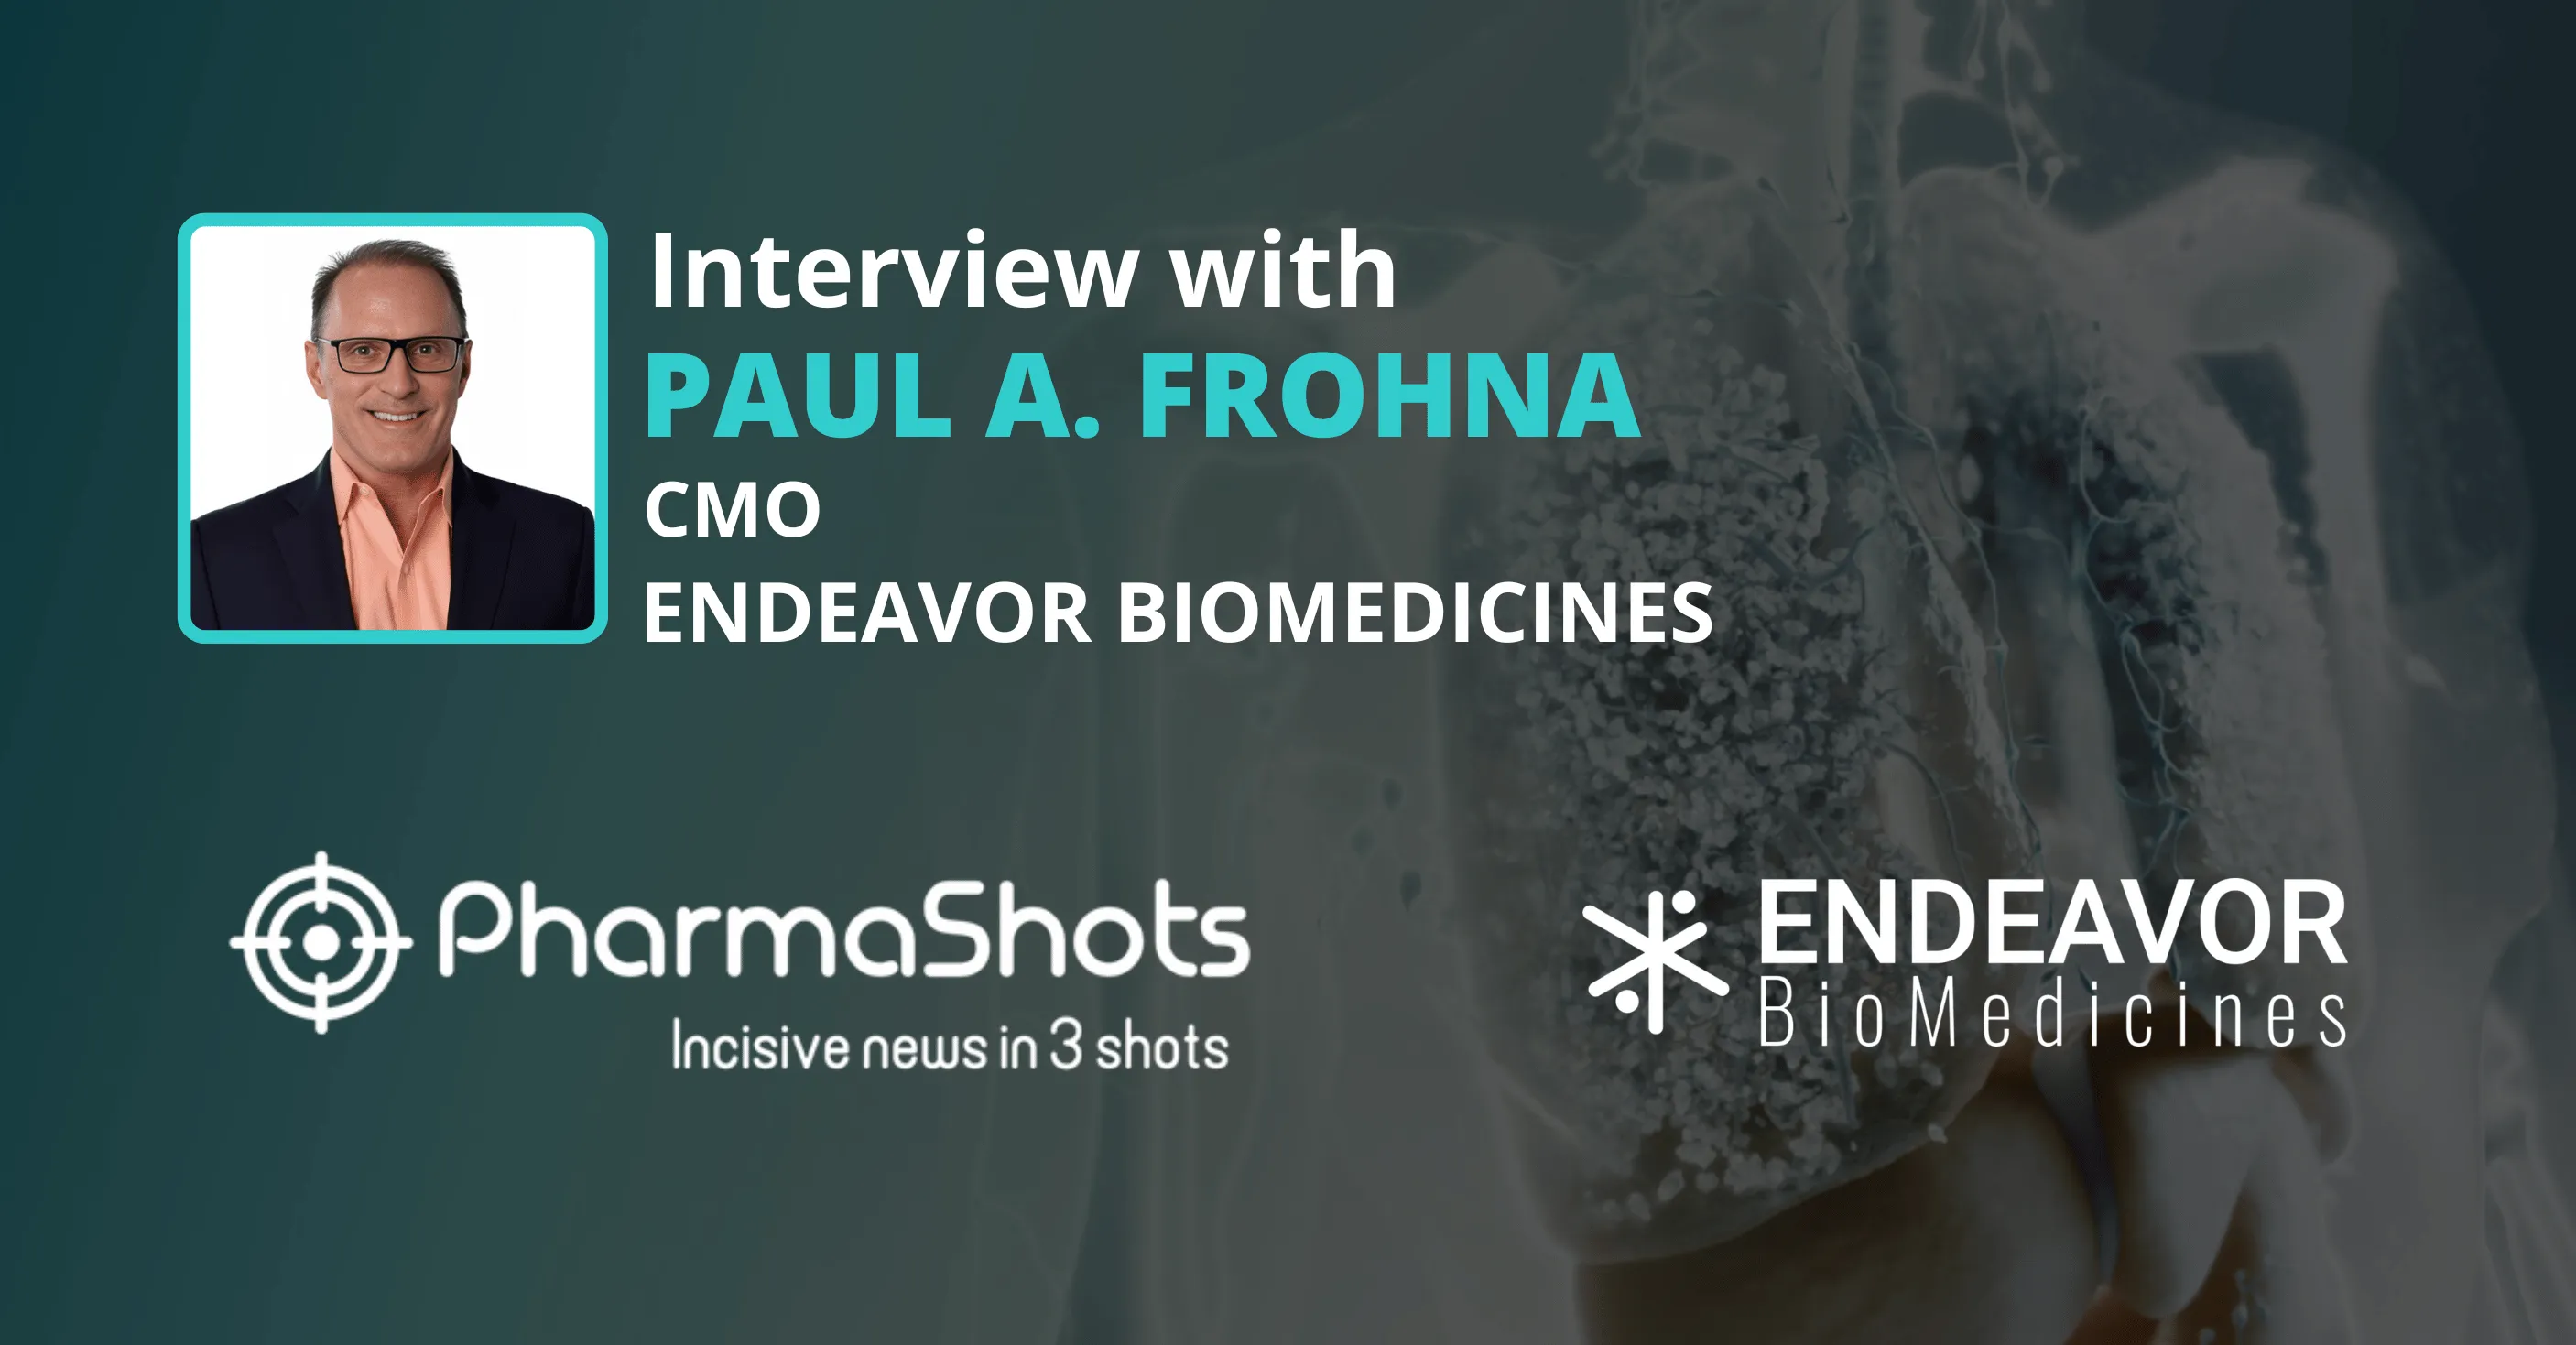 Pipeline Overview: Paul A. Frohna from Endeavor BioMedicines in Conversation with PharmaShots